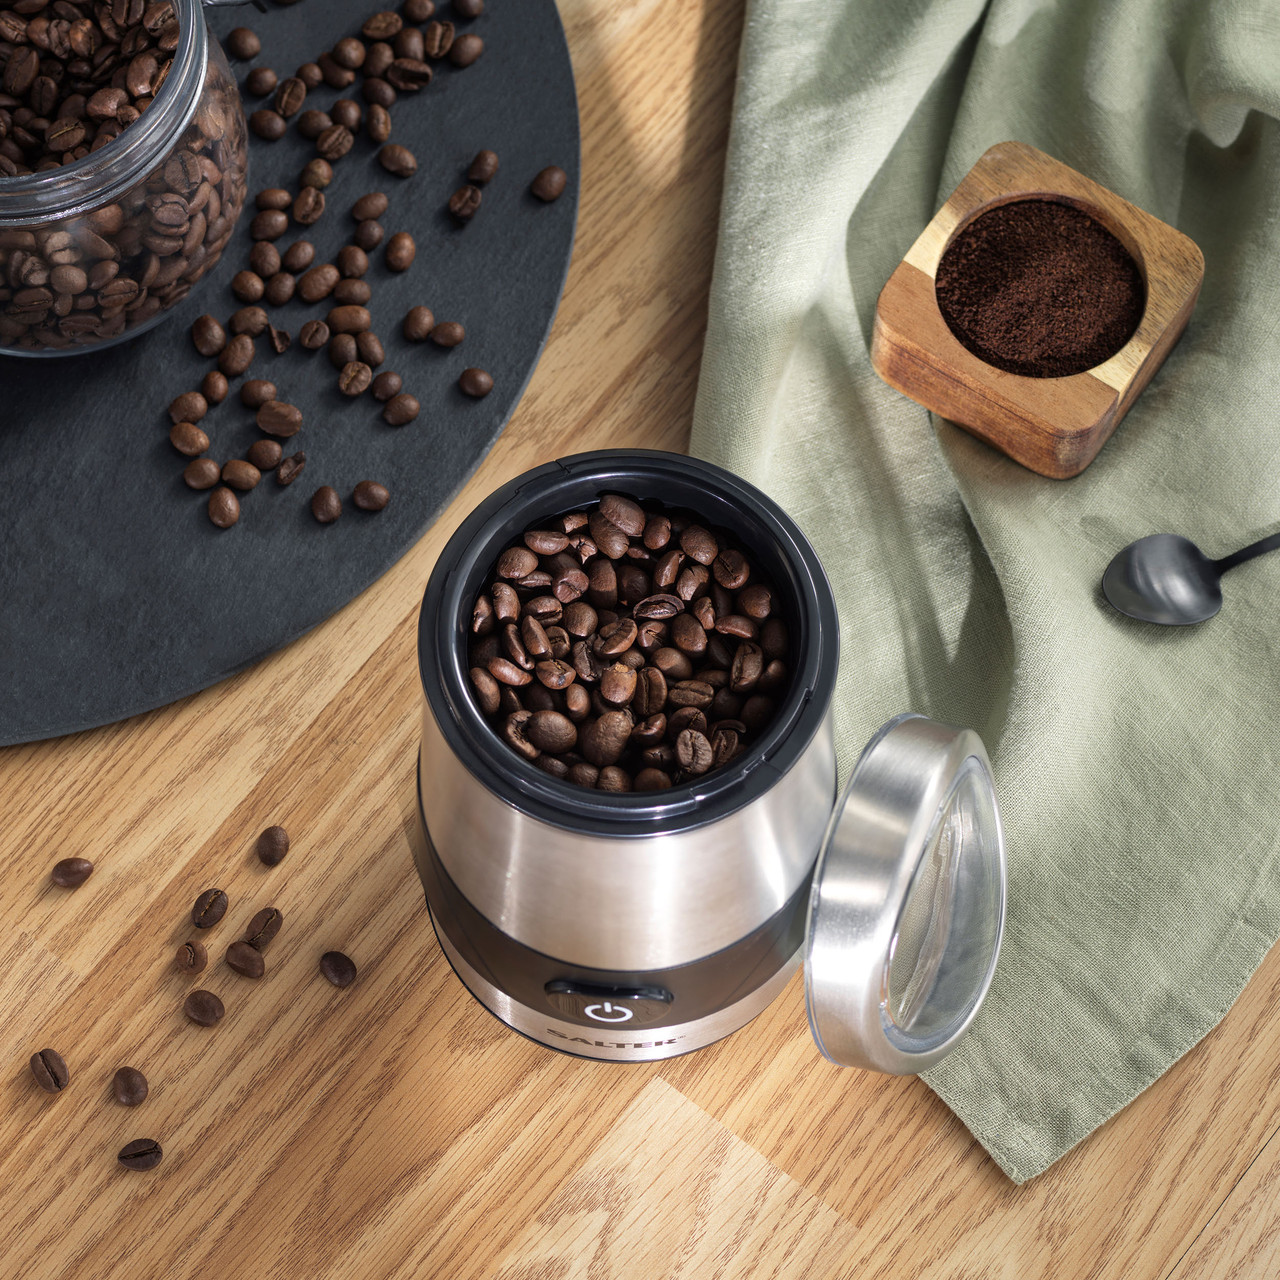 Kalorik® Coffee and Spice Grinder, White and Stainless Steel